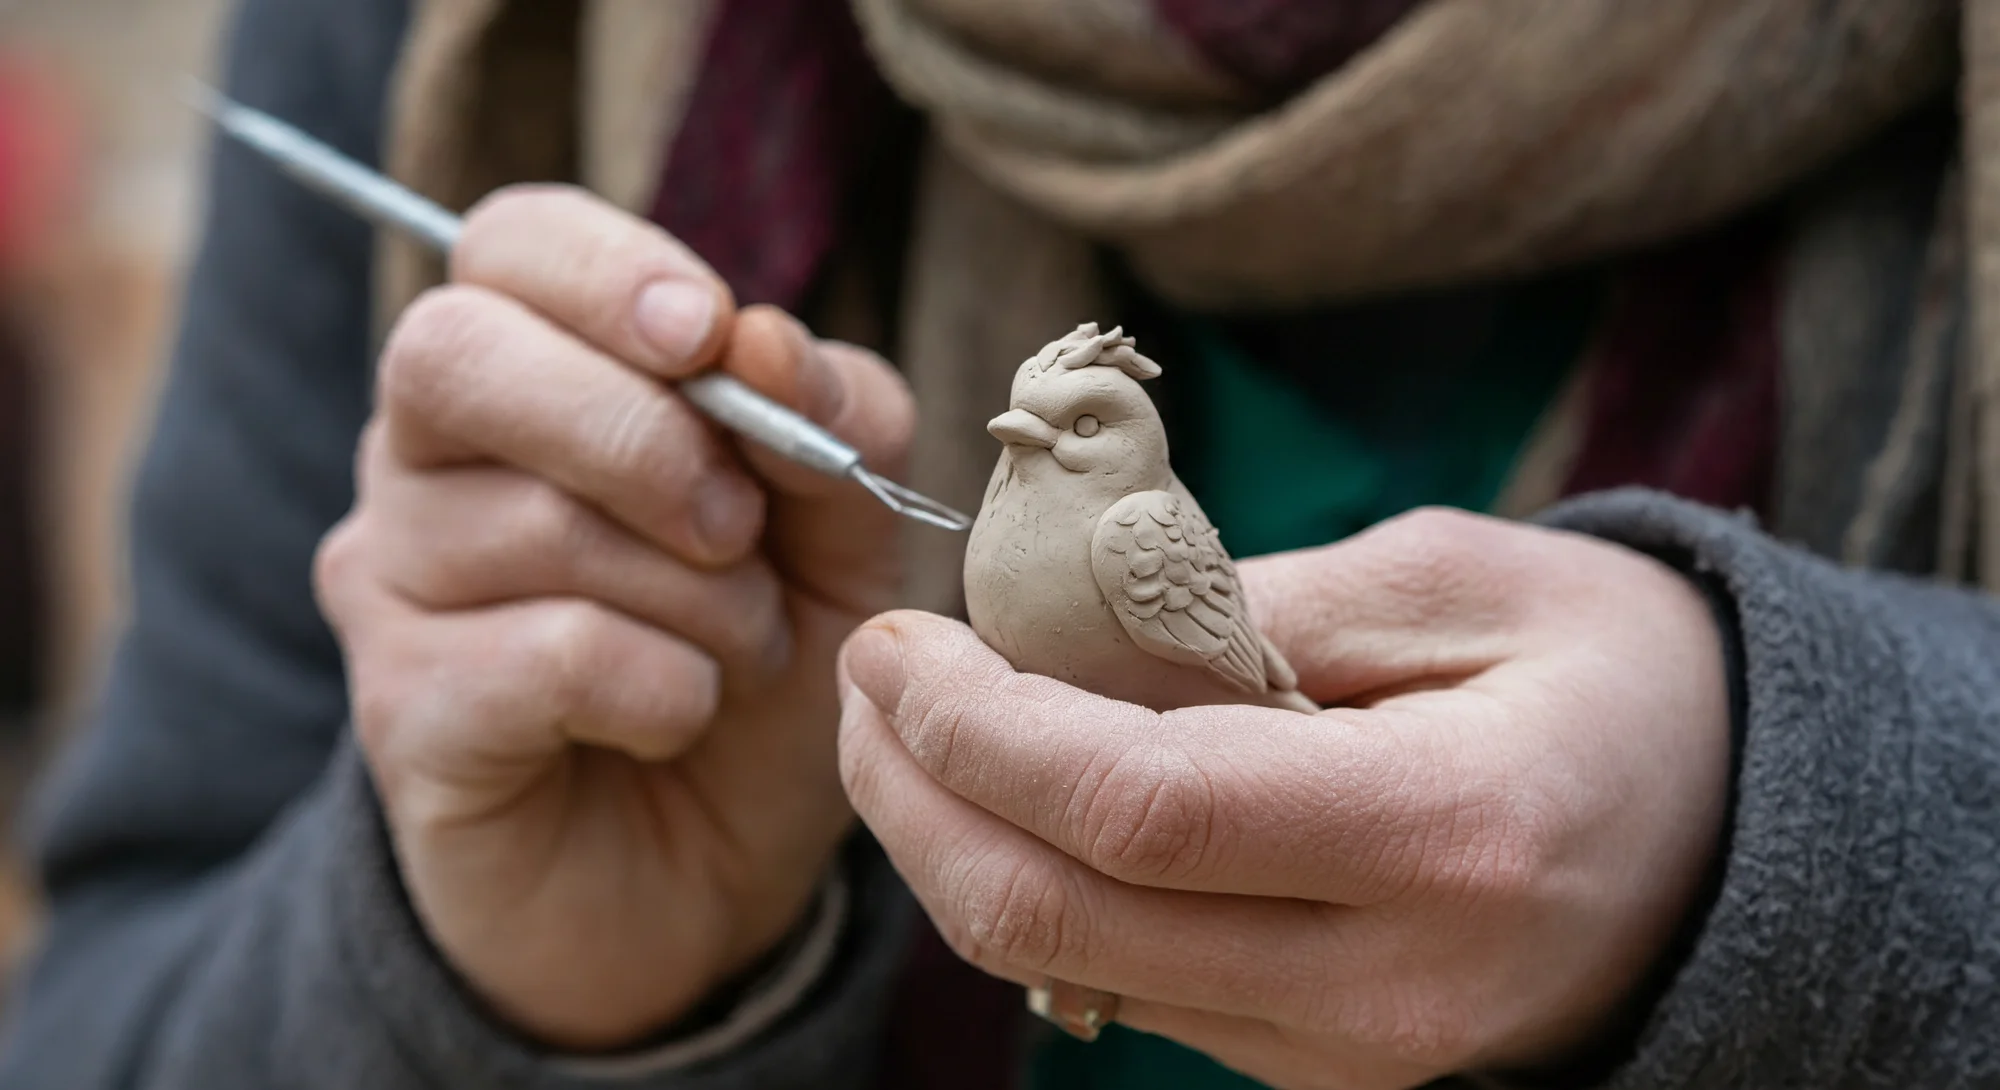 A person’s hand as they hold a small clay figurine of a bird in one hand and sculpt it with a modeling tool in the other. Their hands are covered in clay dust. The sculptor is wearing a gray fleece jacket and a brown and burgundy scarf.